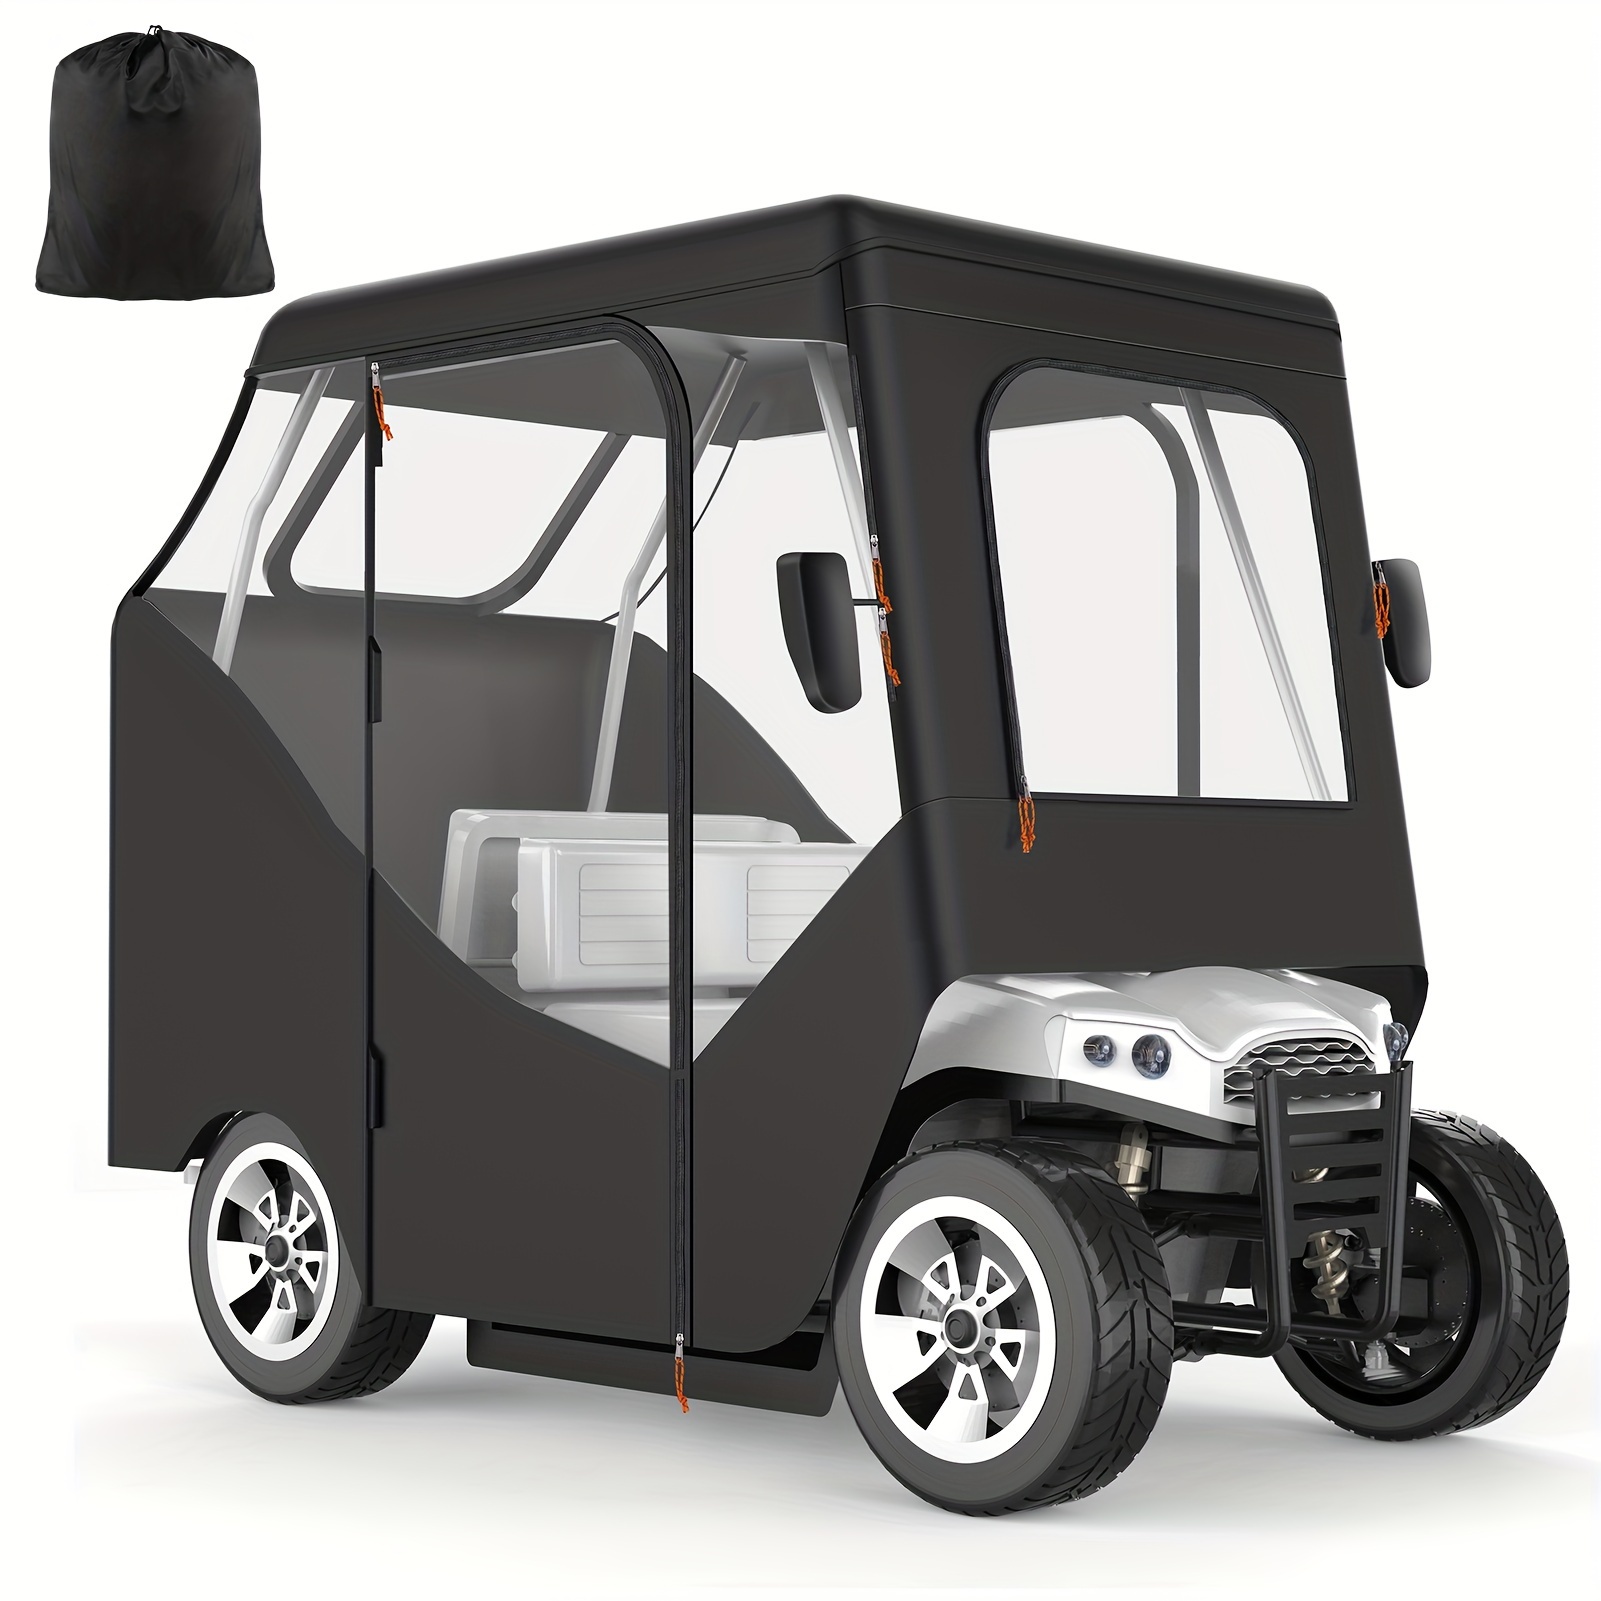 

Golf Cart Cover, Golf Cart Enclosure, 600d Polyester Driving Enclosure 4-sided Transparent Windows, 2 Passenger Covers Universal For Most Brand Carts Sunproof Dustproof